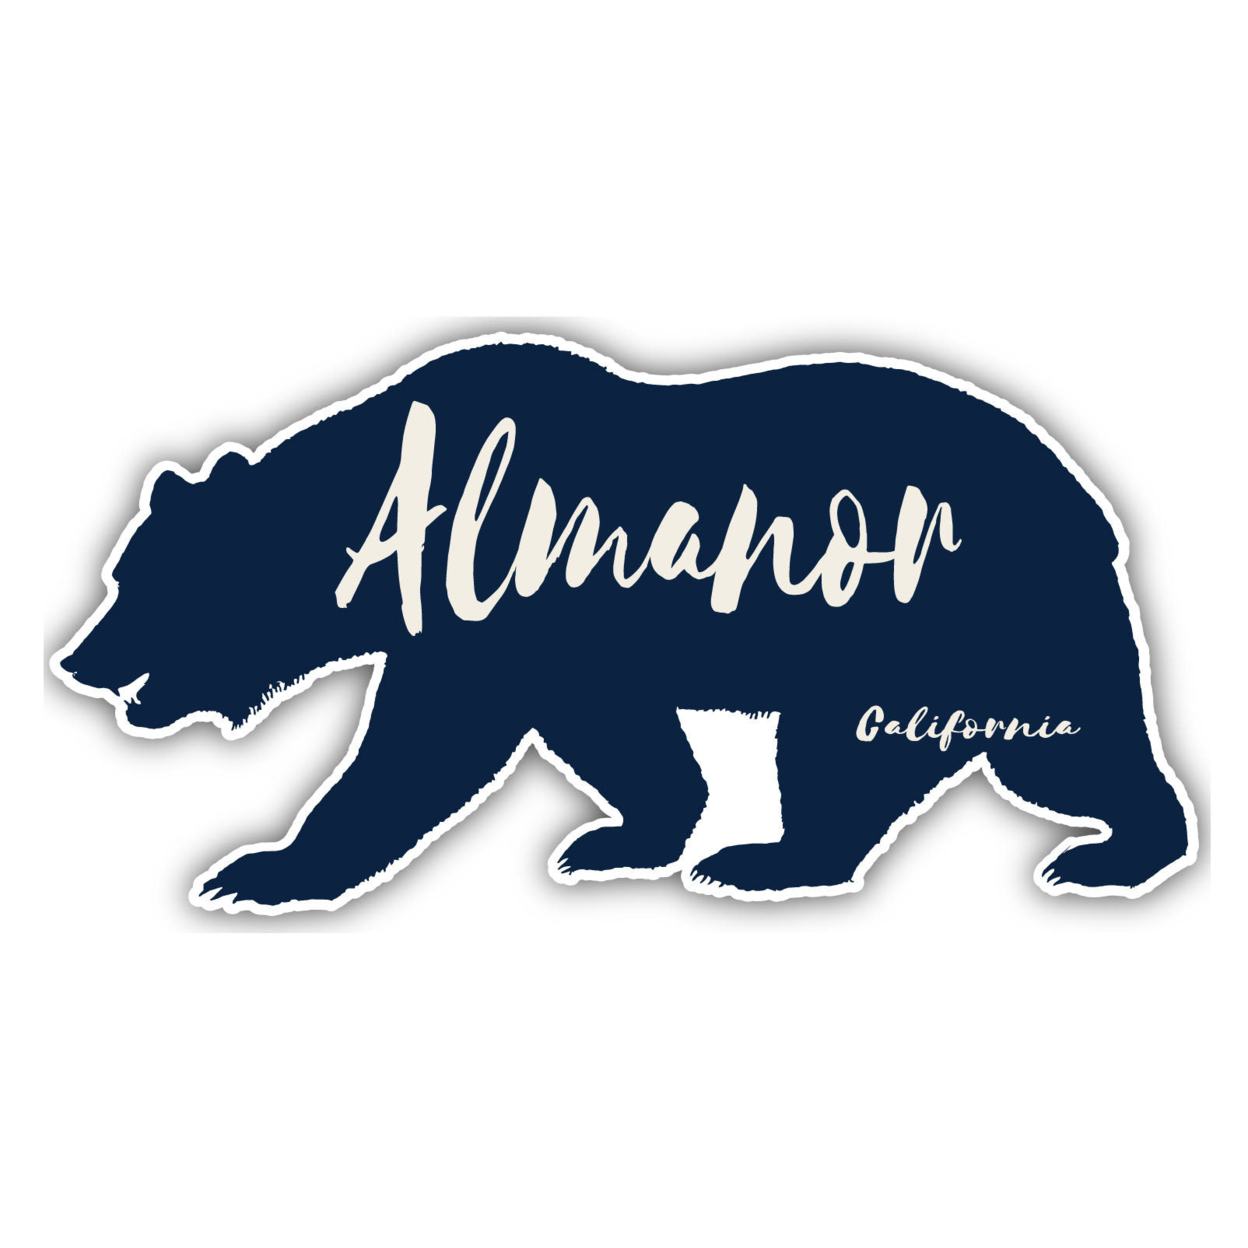 Almanor California Souvenir Decorative Stickers (Choose Theme And Size) - 4-Pack, 2-Inch, Bear